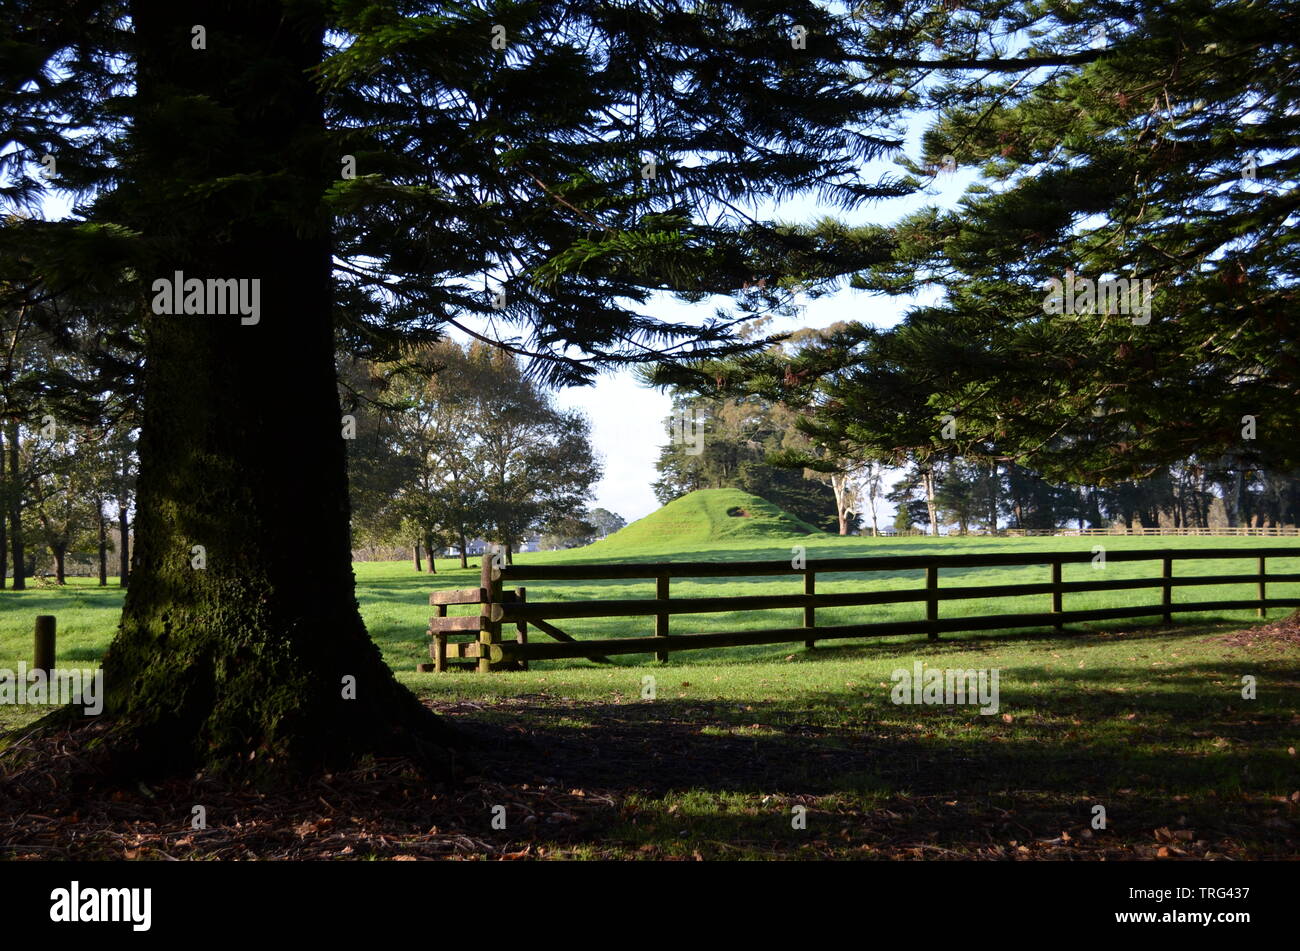 Norfolk Island Pine Trees in the Foreground Overlooking Paddock at the Auckland Cornwall Park Stock Photo